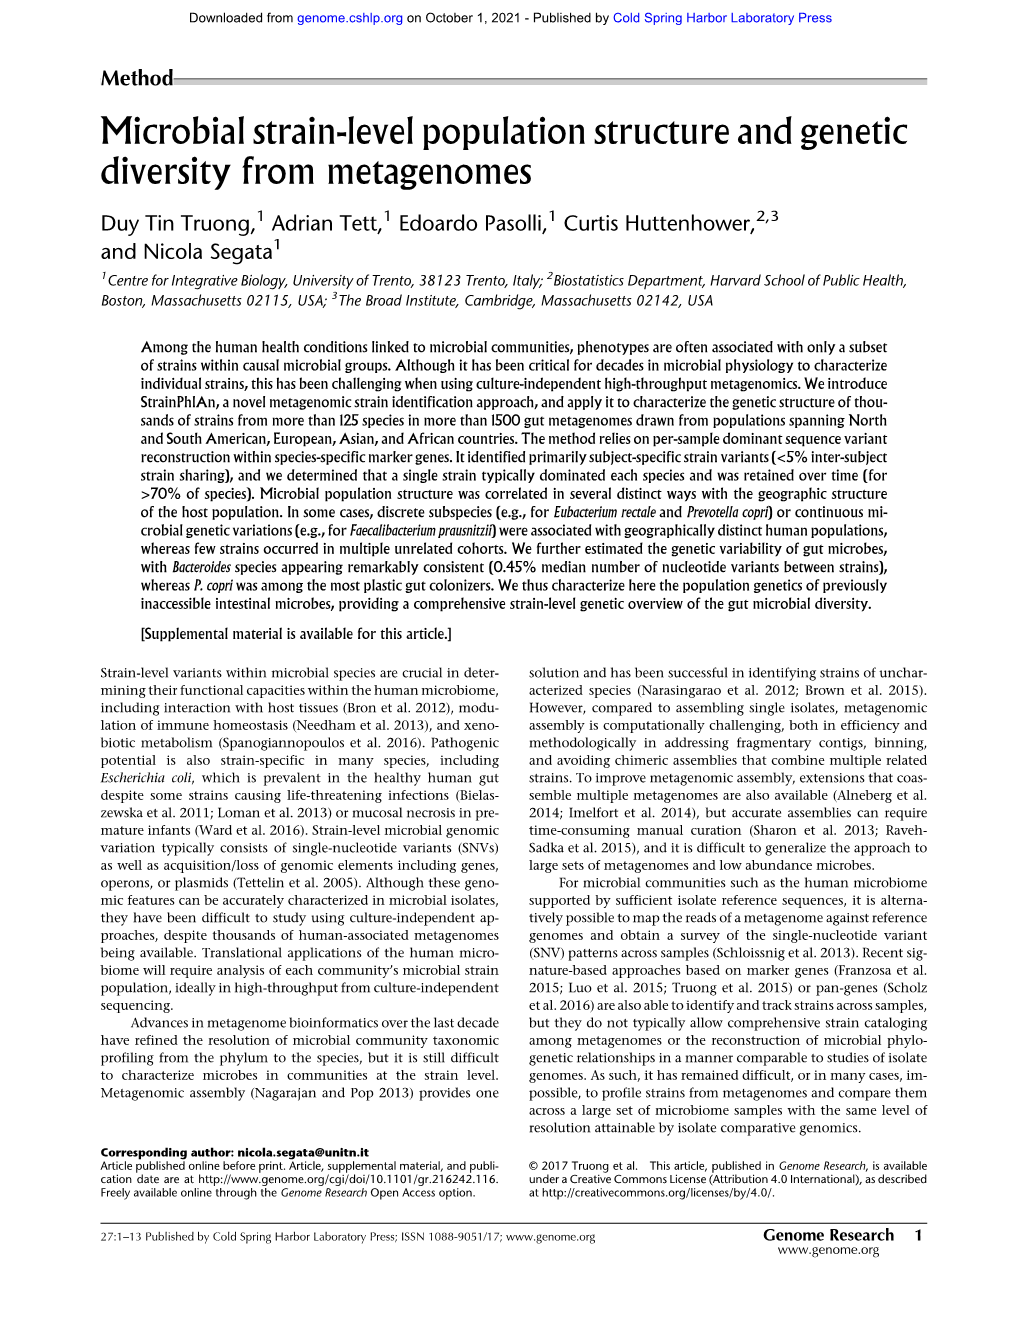 Microbial Strain-Level Population Structure and Genetic Diversity from Metagenomes